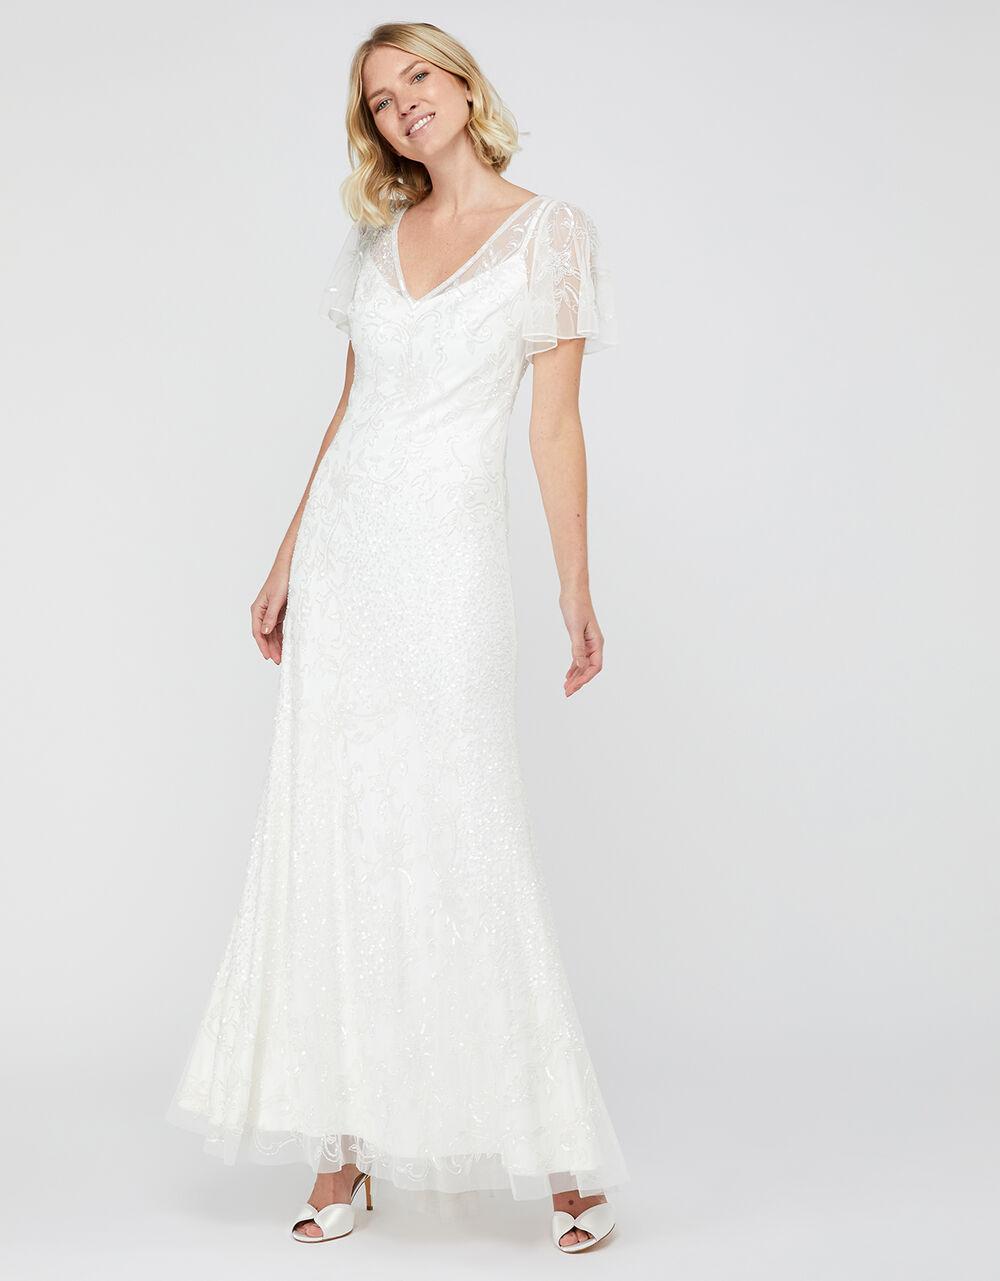 30 Beautiful Vow Renewal Dresses 2021 - hitched.co.uk